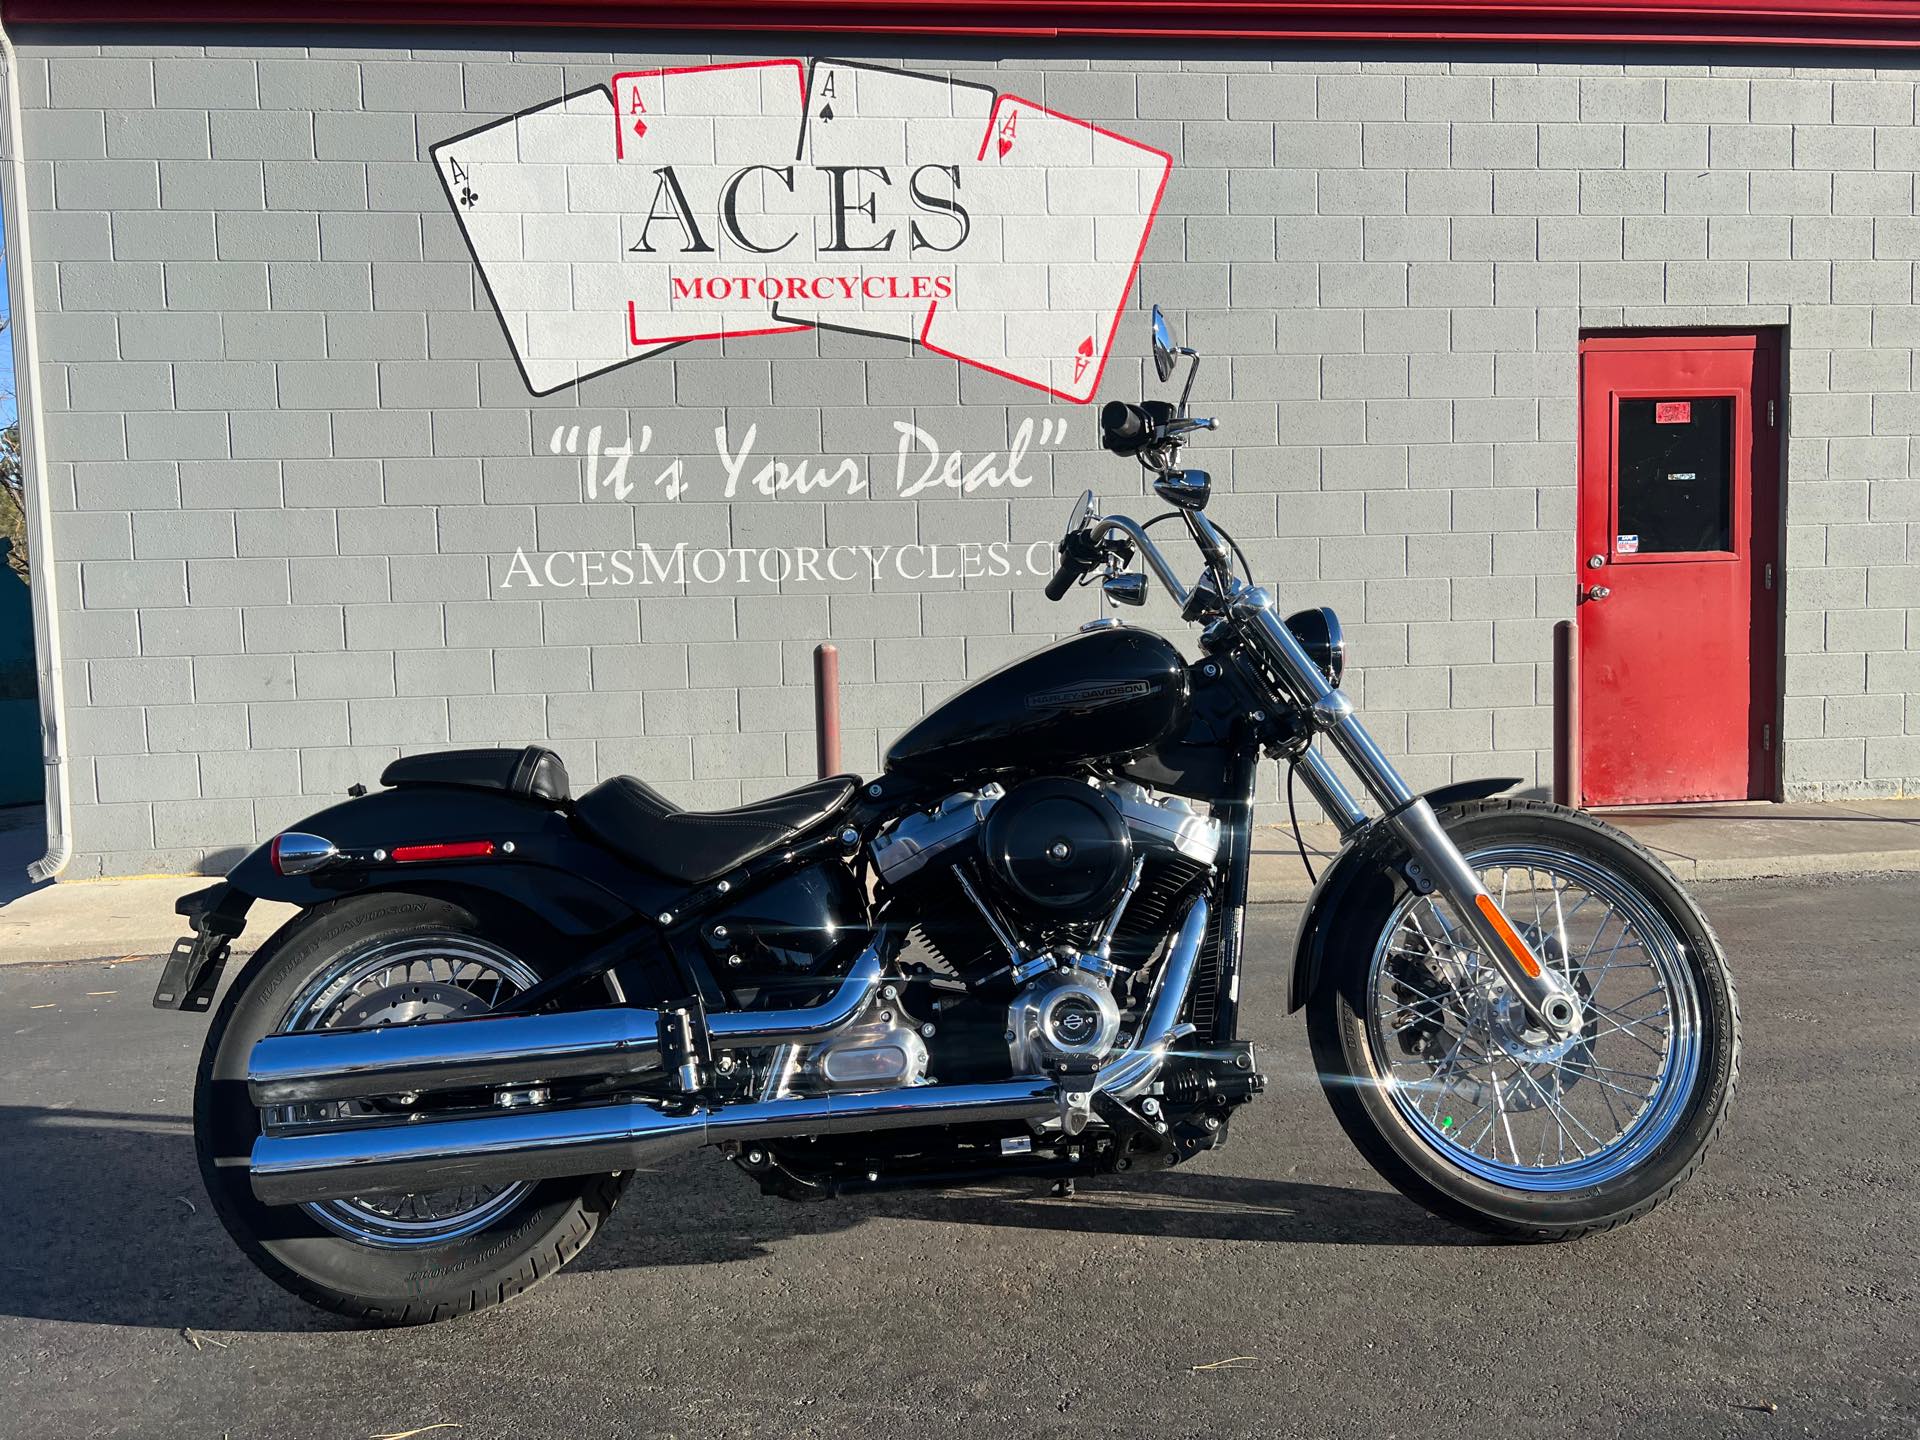 2021 Harley-Davidson FXST at Aces Motorcycles - Fort Collins